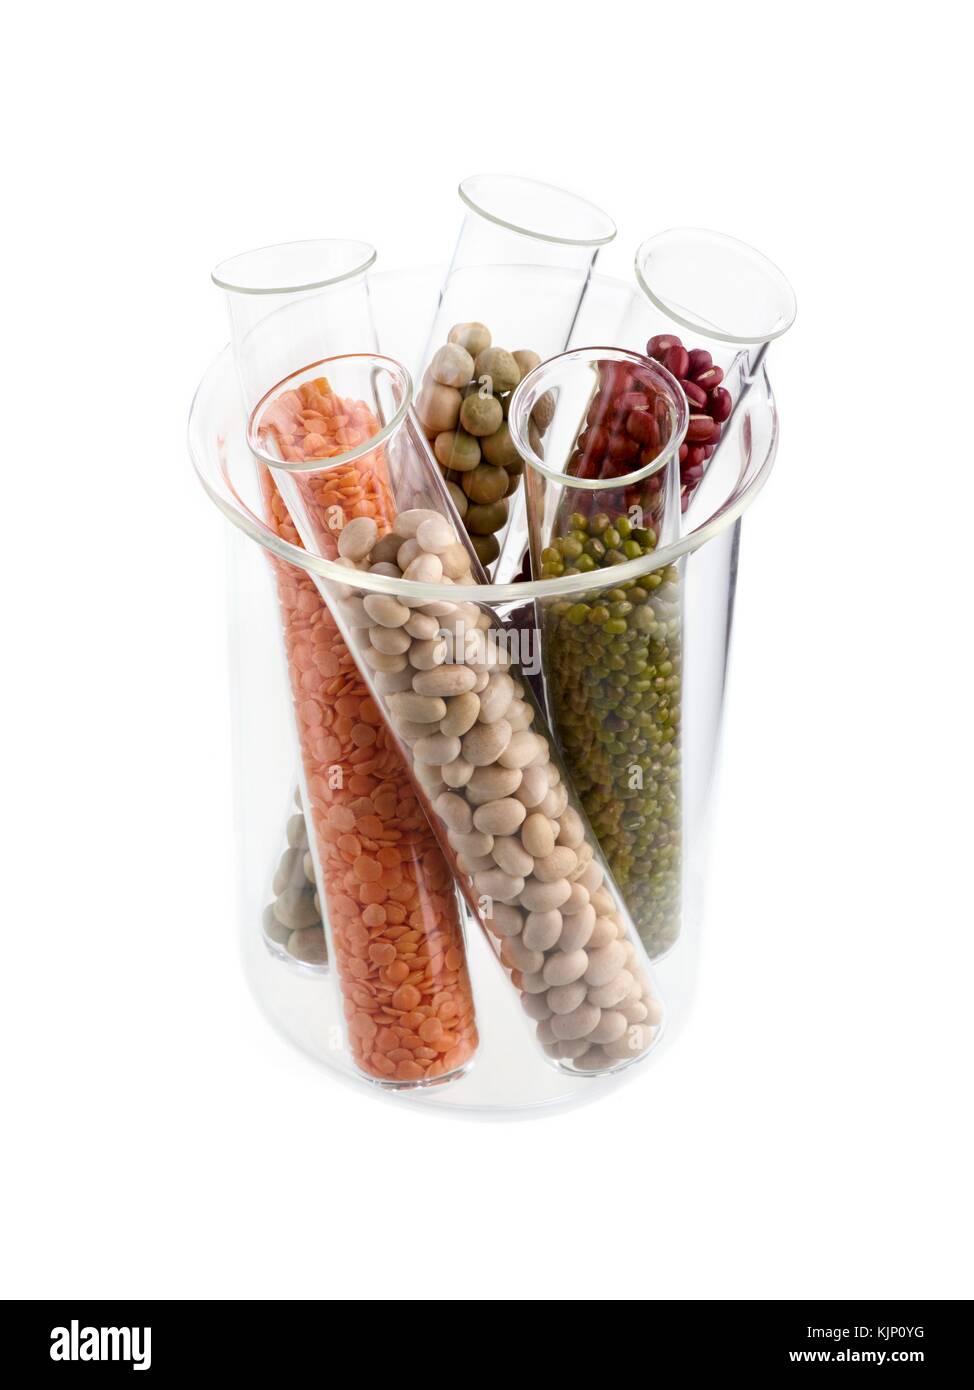 Pulses in test tubes against a white background. Stock Photo